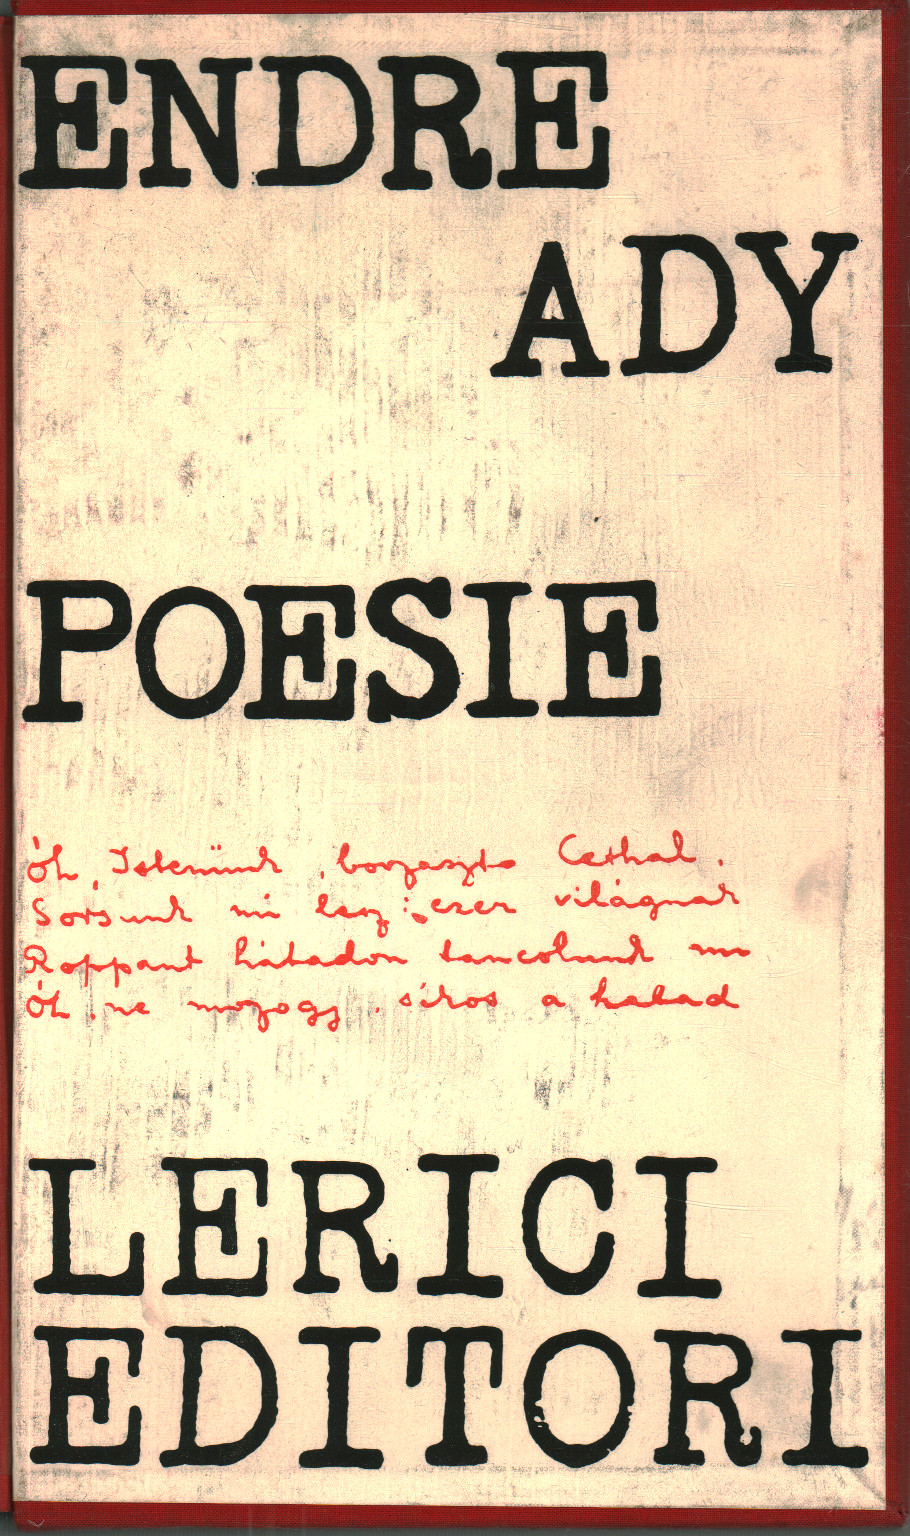 Poesie, di Endre Ady, s.a.